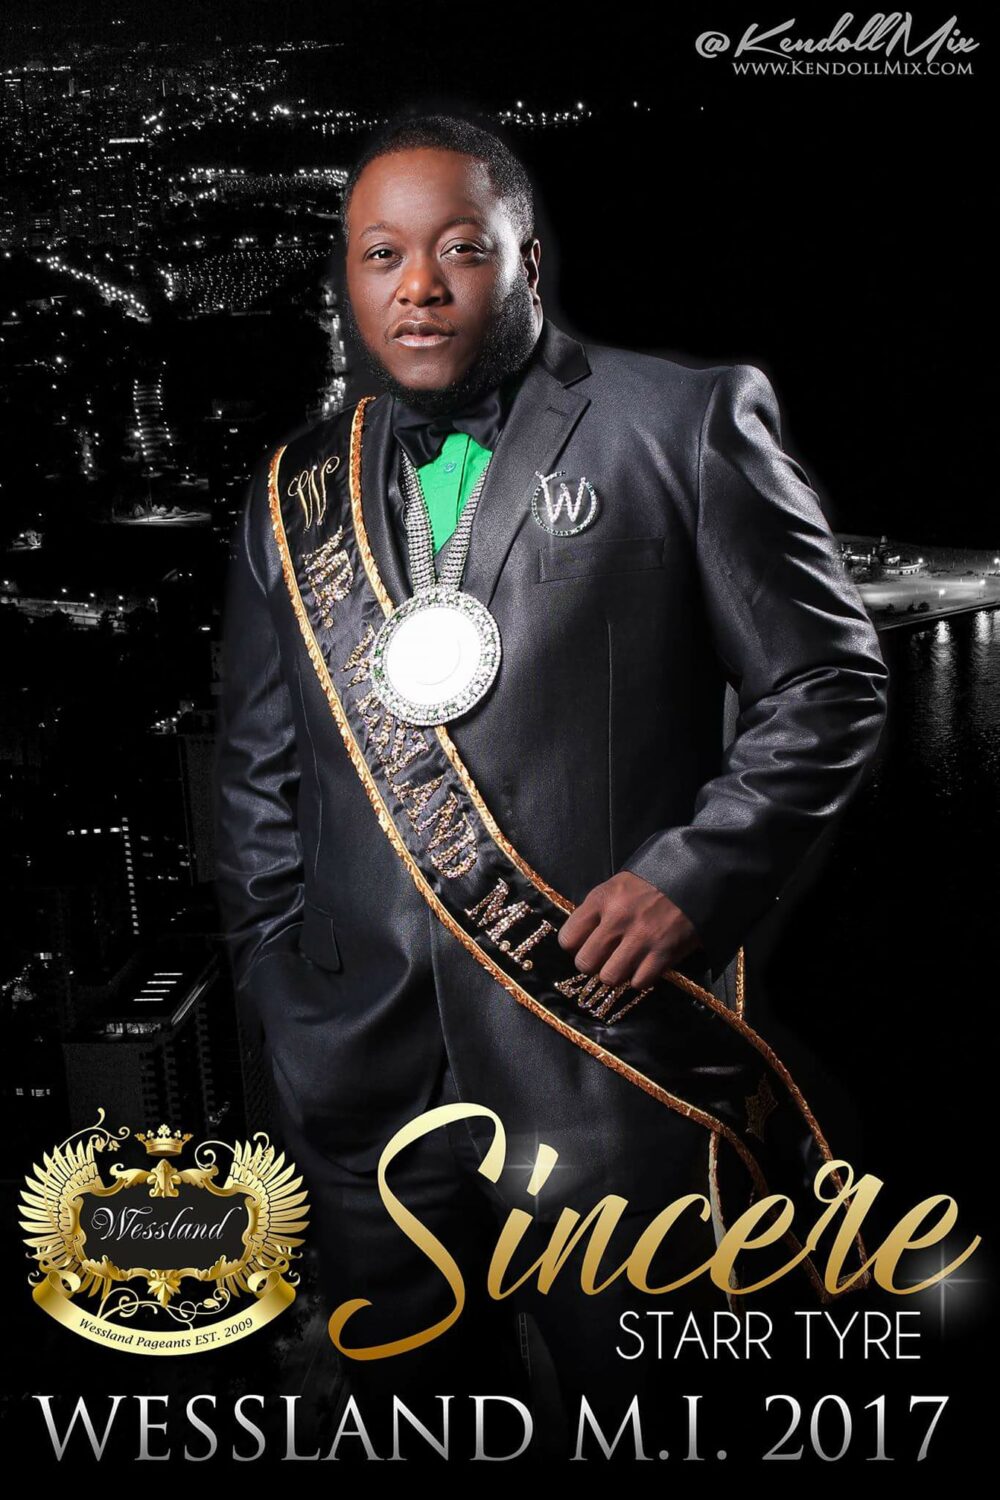 Sincere Starr Tyre - Photo by Kendoll Mix